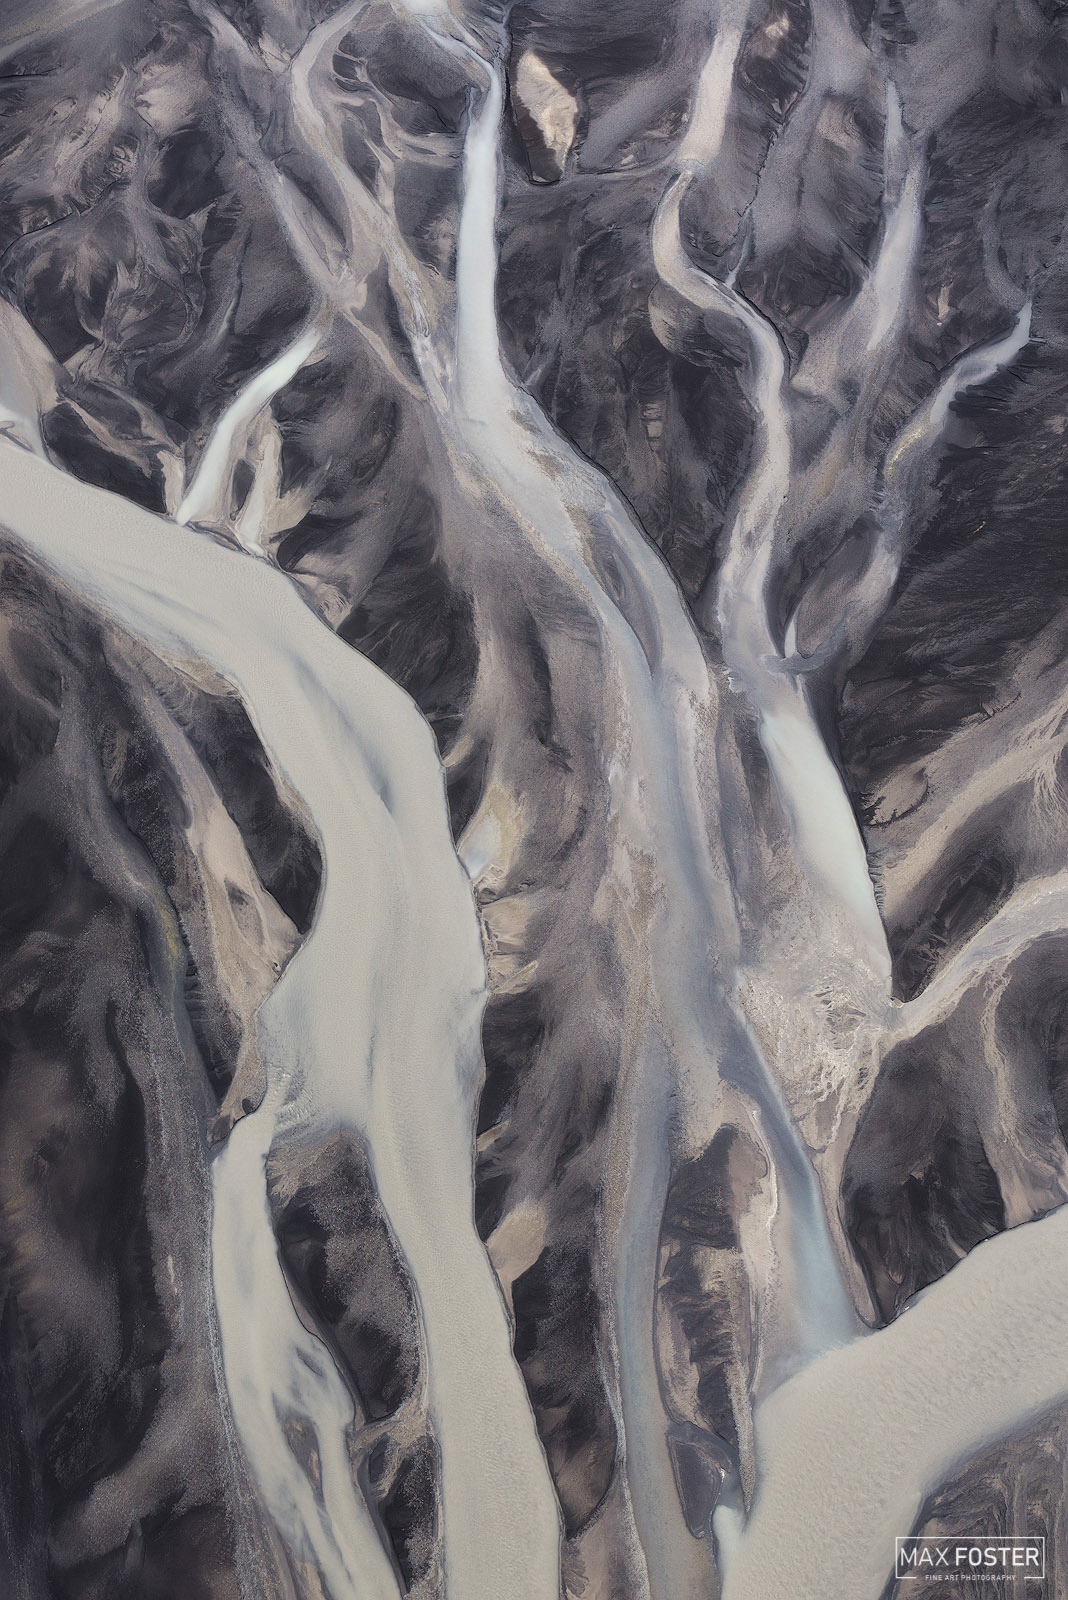 Refresh your space with Nature's Tapestry, Max Foster's limited edition aerial photography print of rivers in Iceland from his...